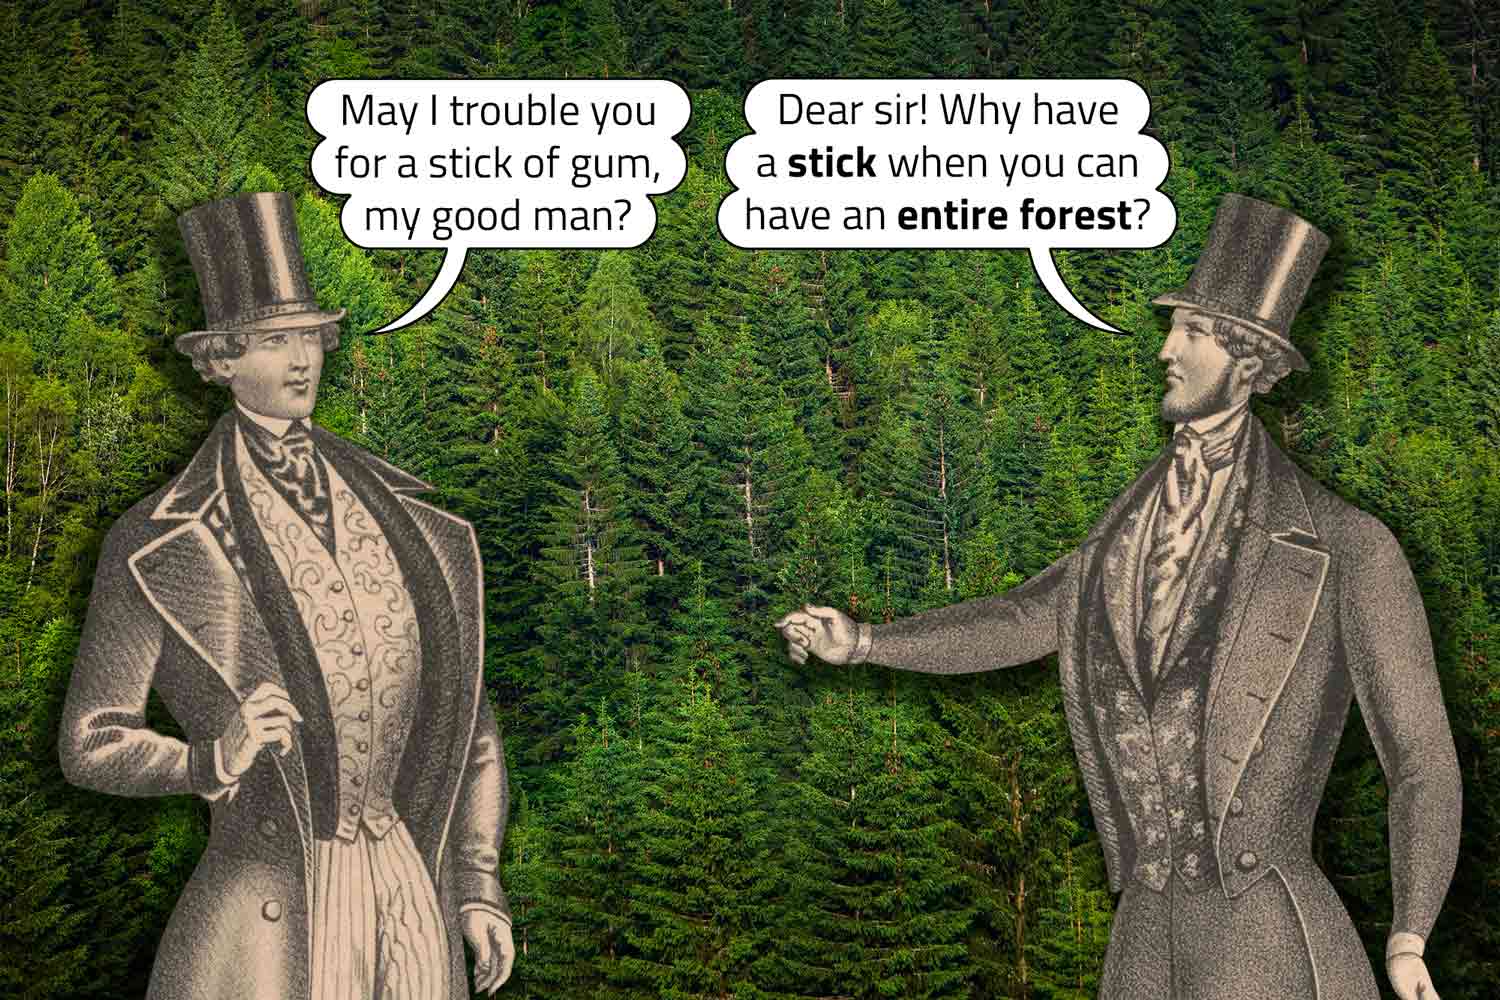 A man in 19th century clothing asks a similarly dressed man for a piece of gum and the other man directs him to a forest.